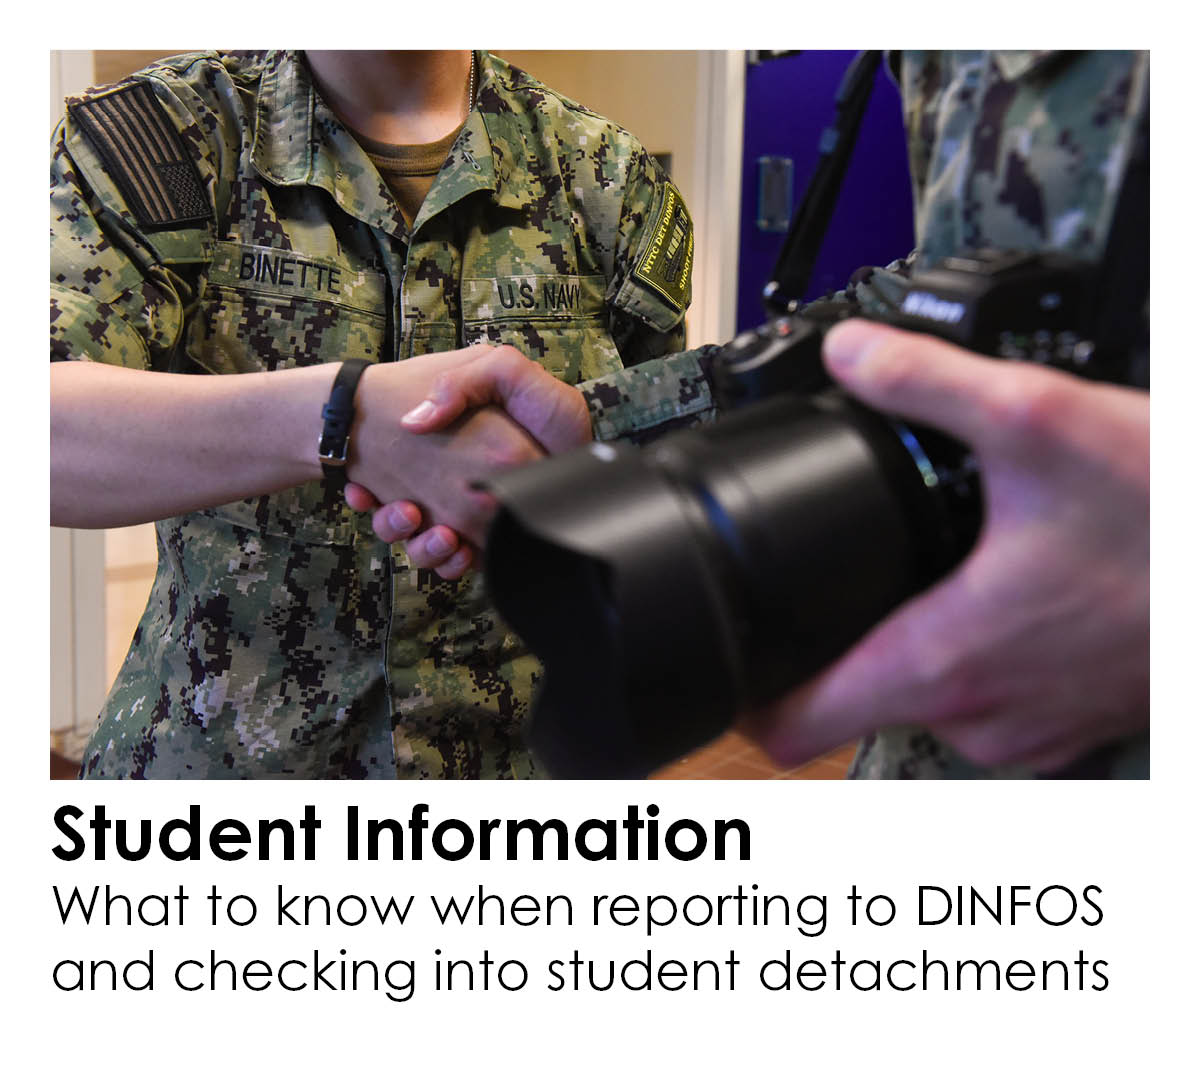 Student Information - What to know when reporting to DINFOS and checking into student detachments